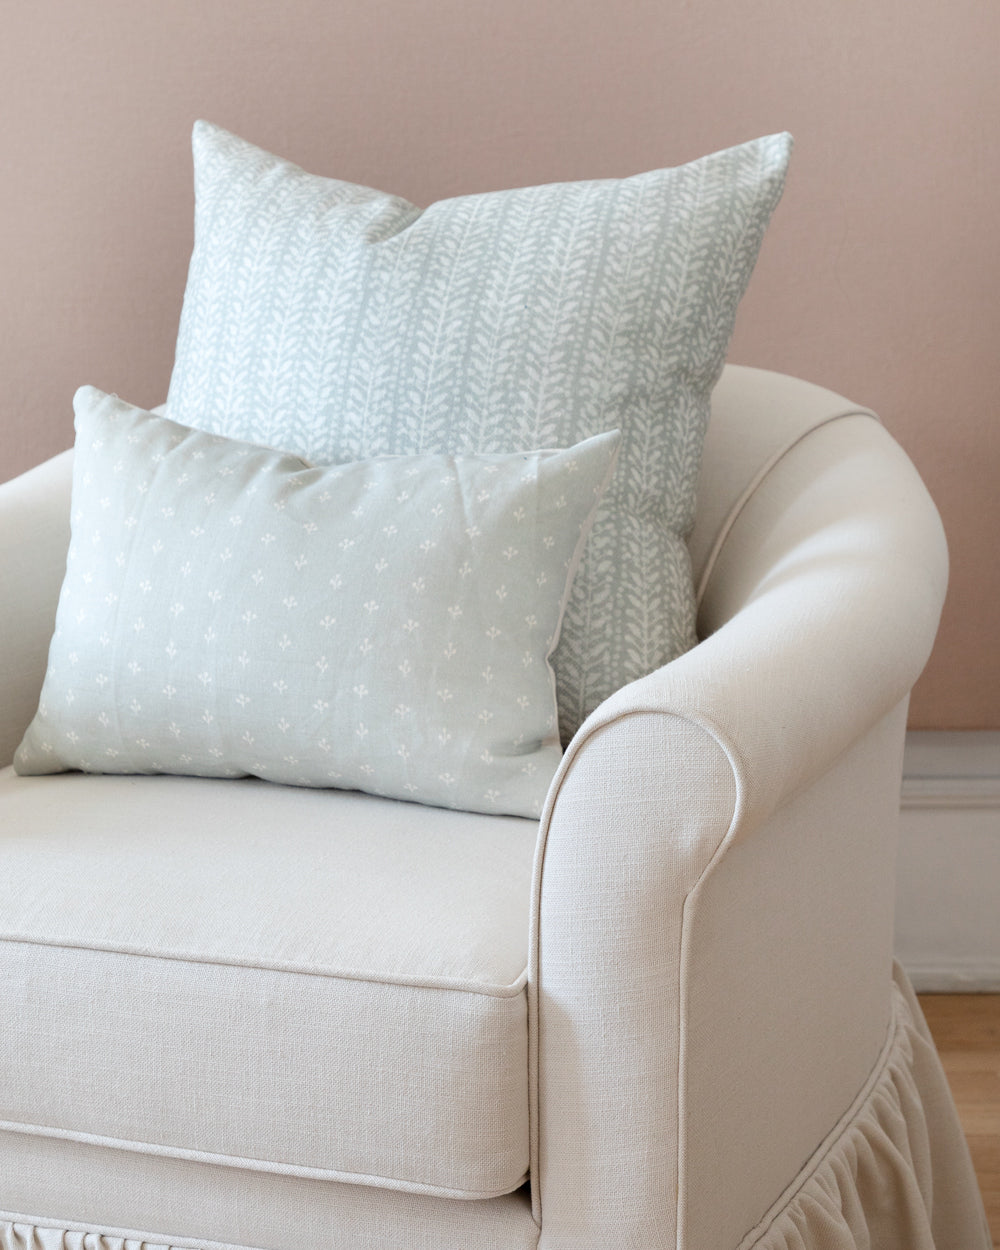 Subtle white floral/vine stripe pillow on a white chair with a complimentary pillow in front